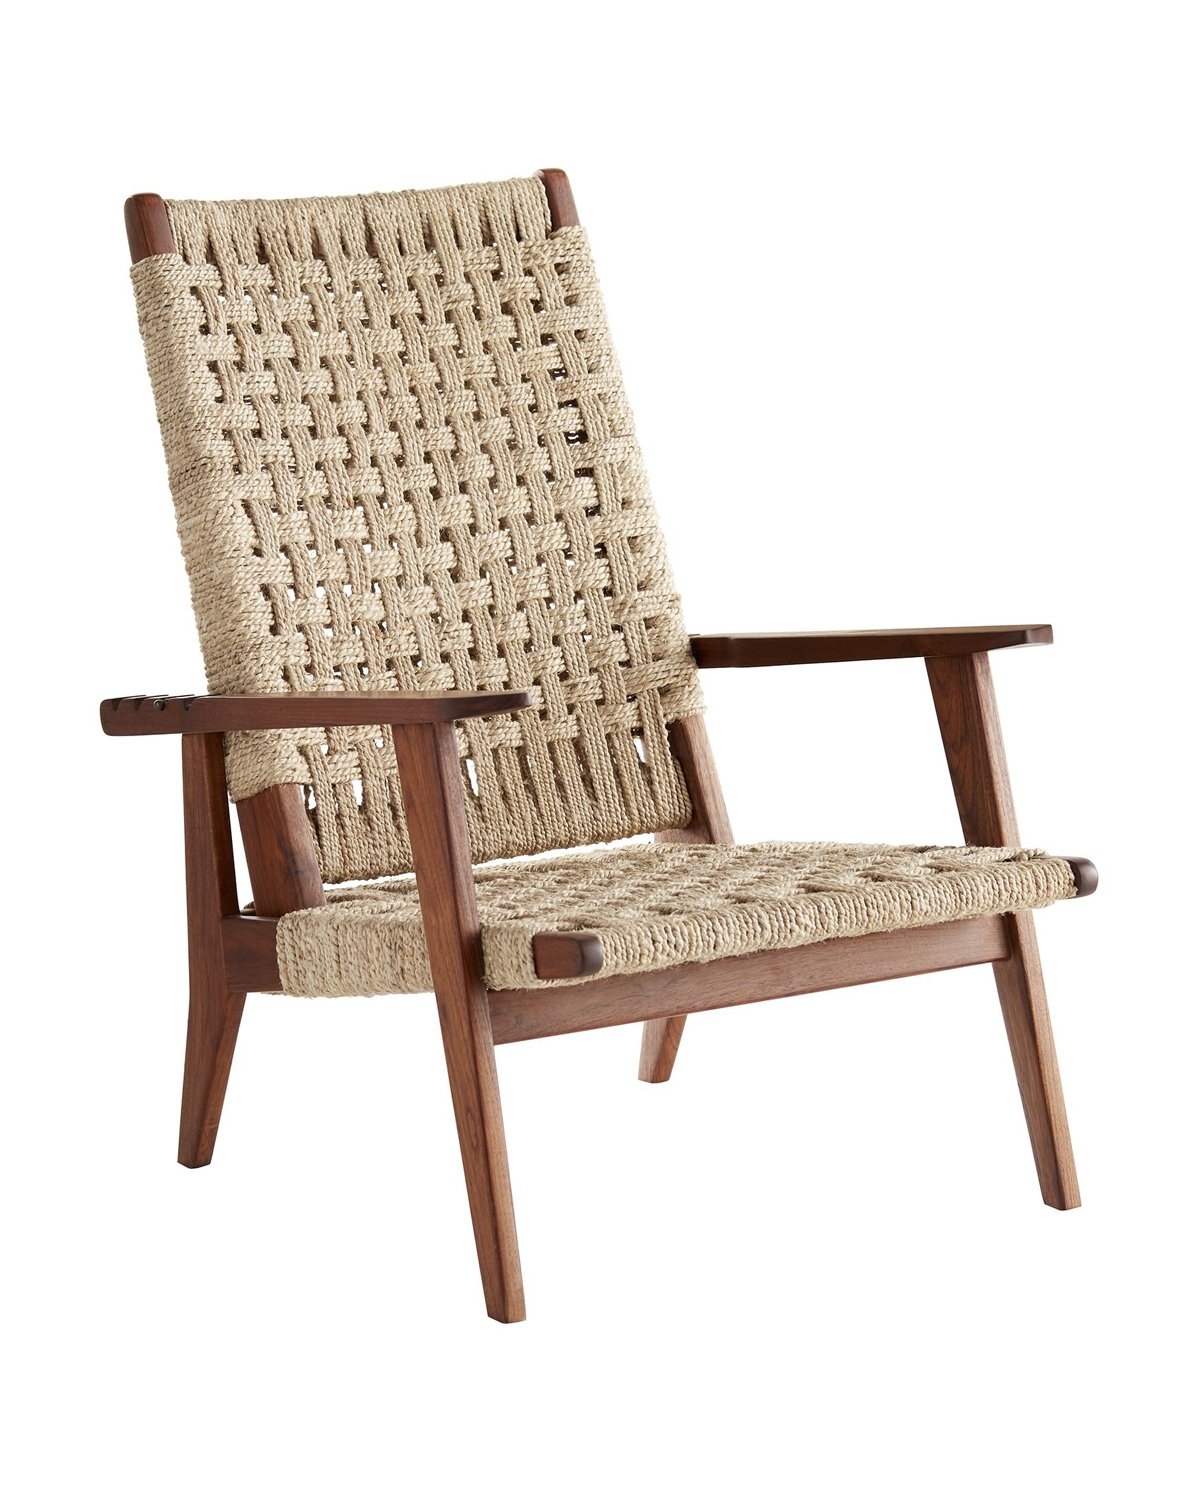 TILLY CHAIR - Image 0